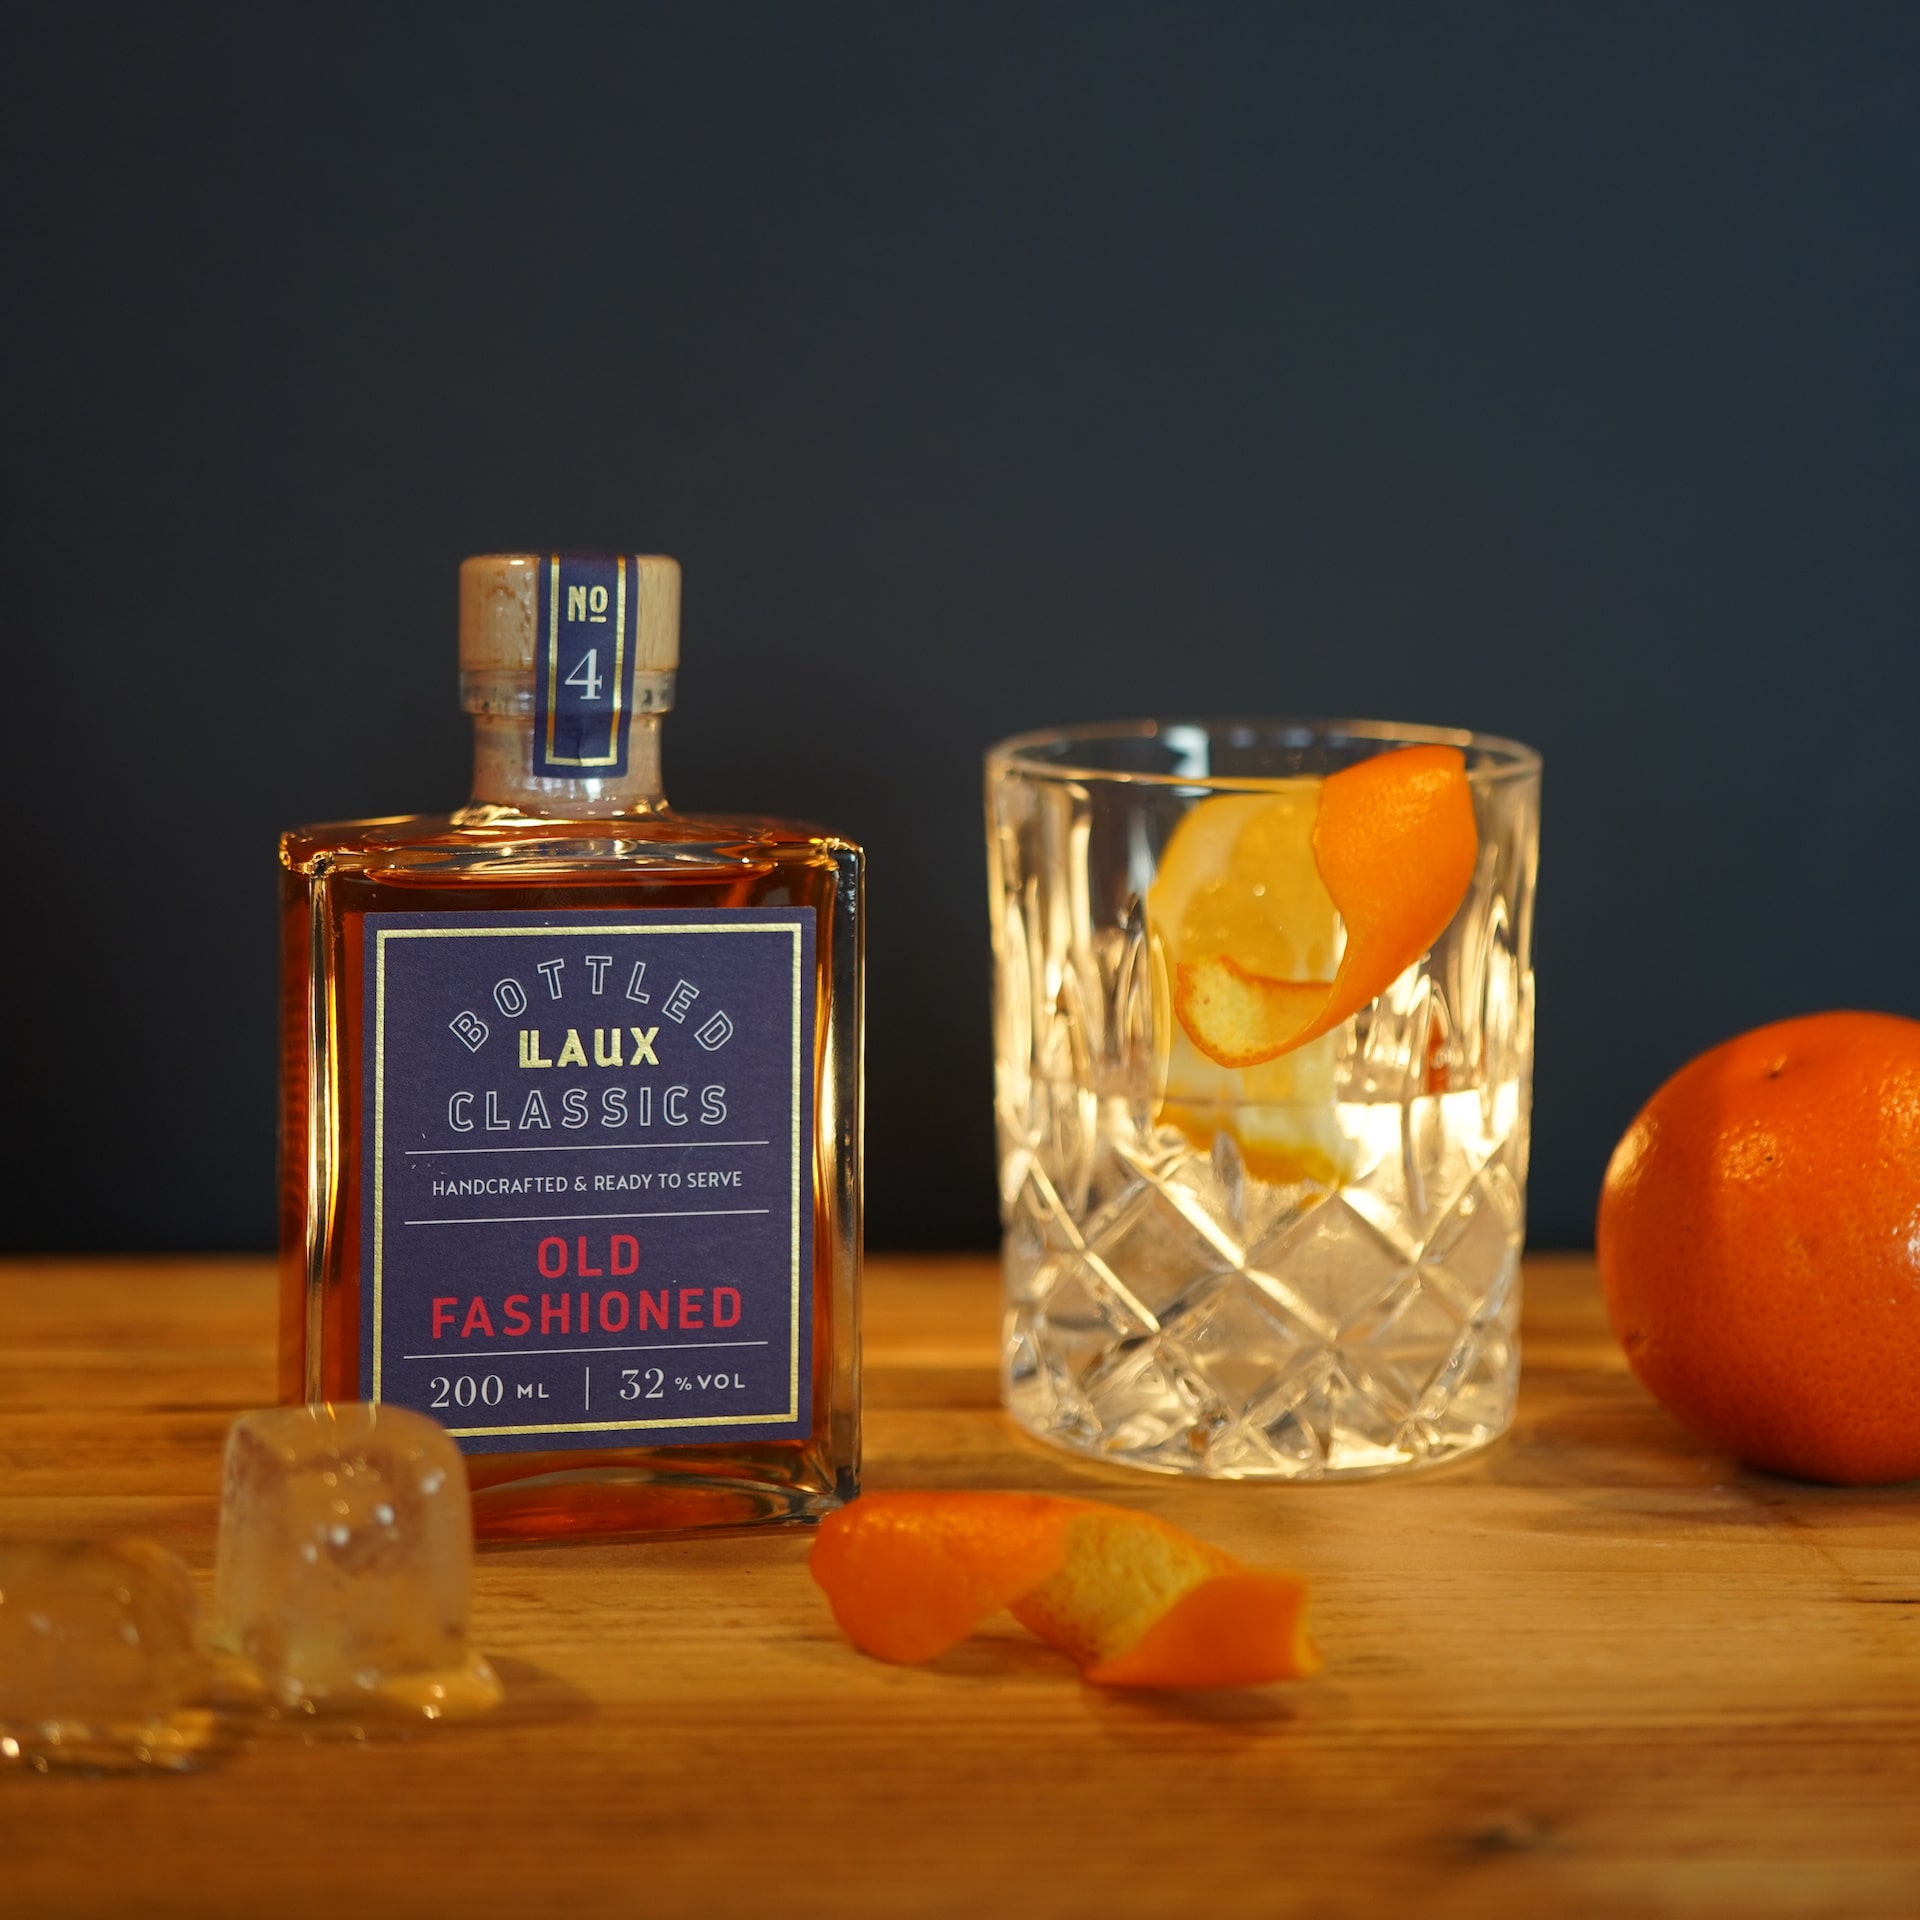 LAUX Old Fashioned Bottled Classic in Flasche neben Old Fashioned Cocktail im Glas